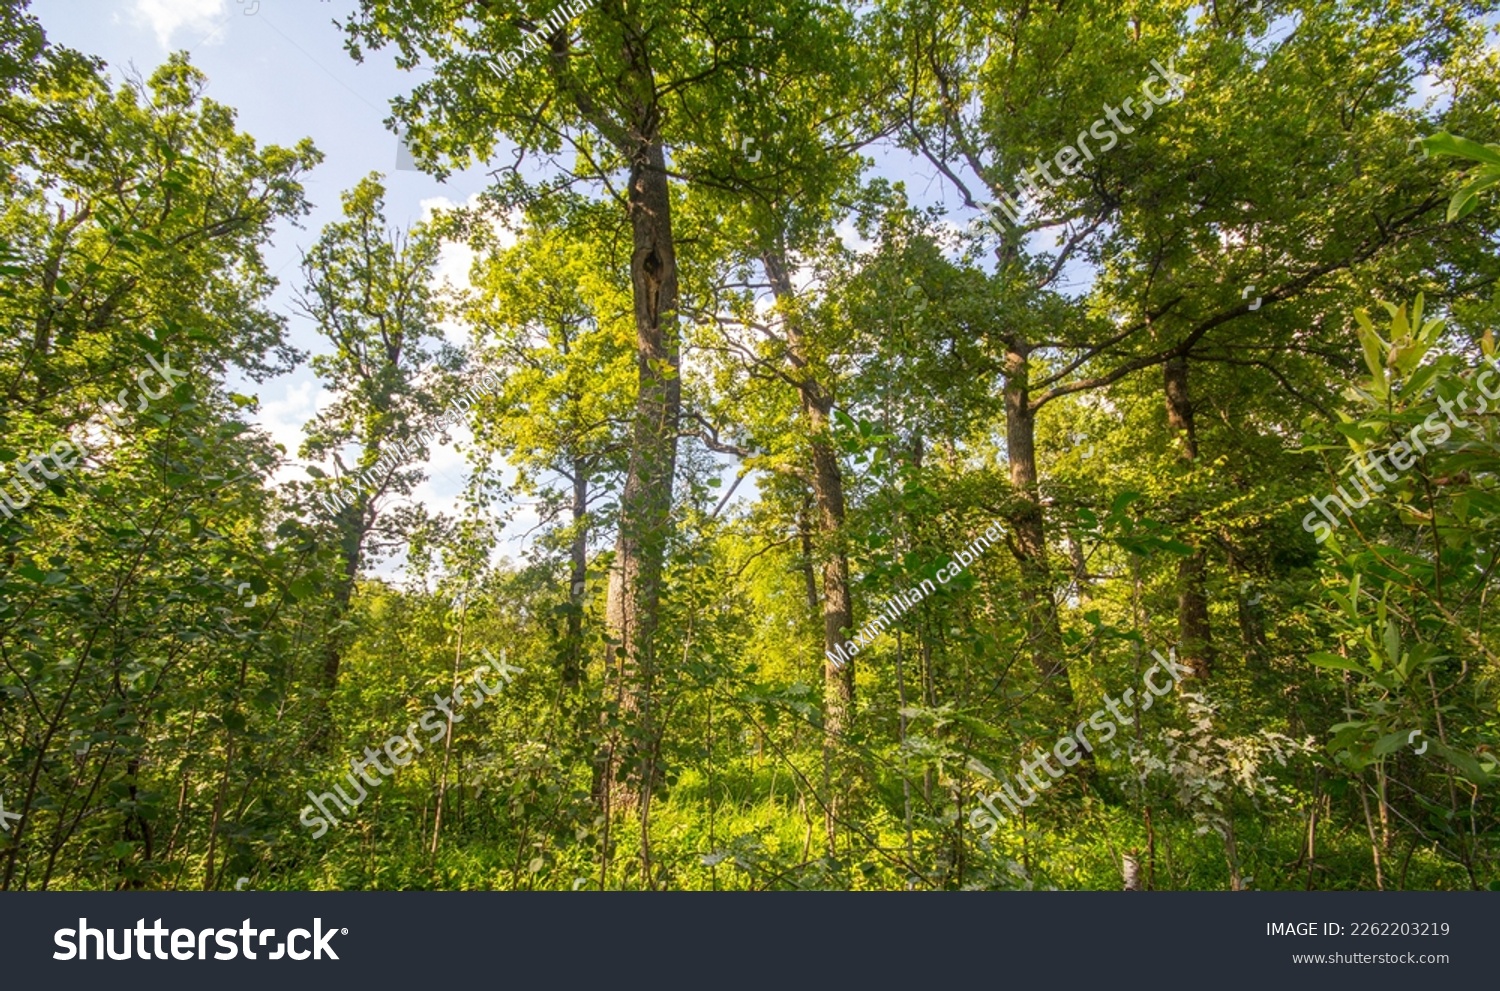 Dendrology. European deciduous forests. Wood-meadow (parklike country). Old oak forest (Quercetum). Pleasant eye spots of shadow and sun on green #2262203219